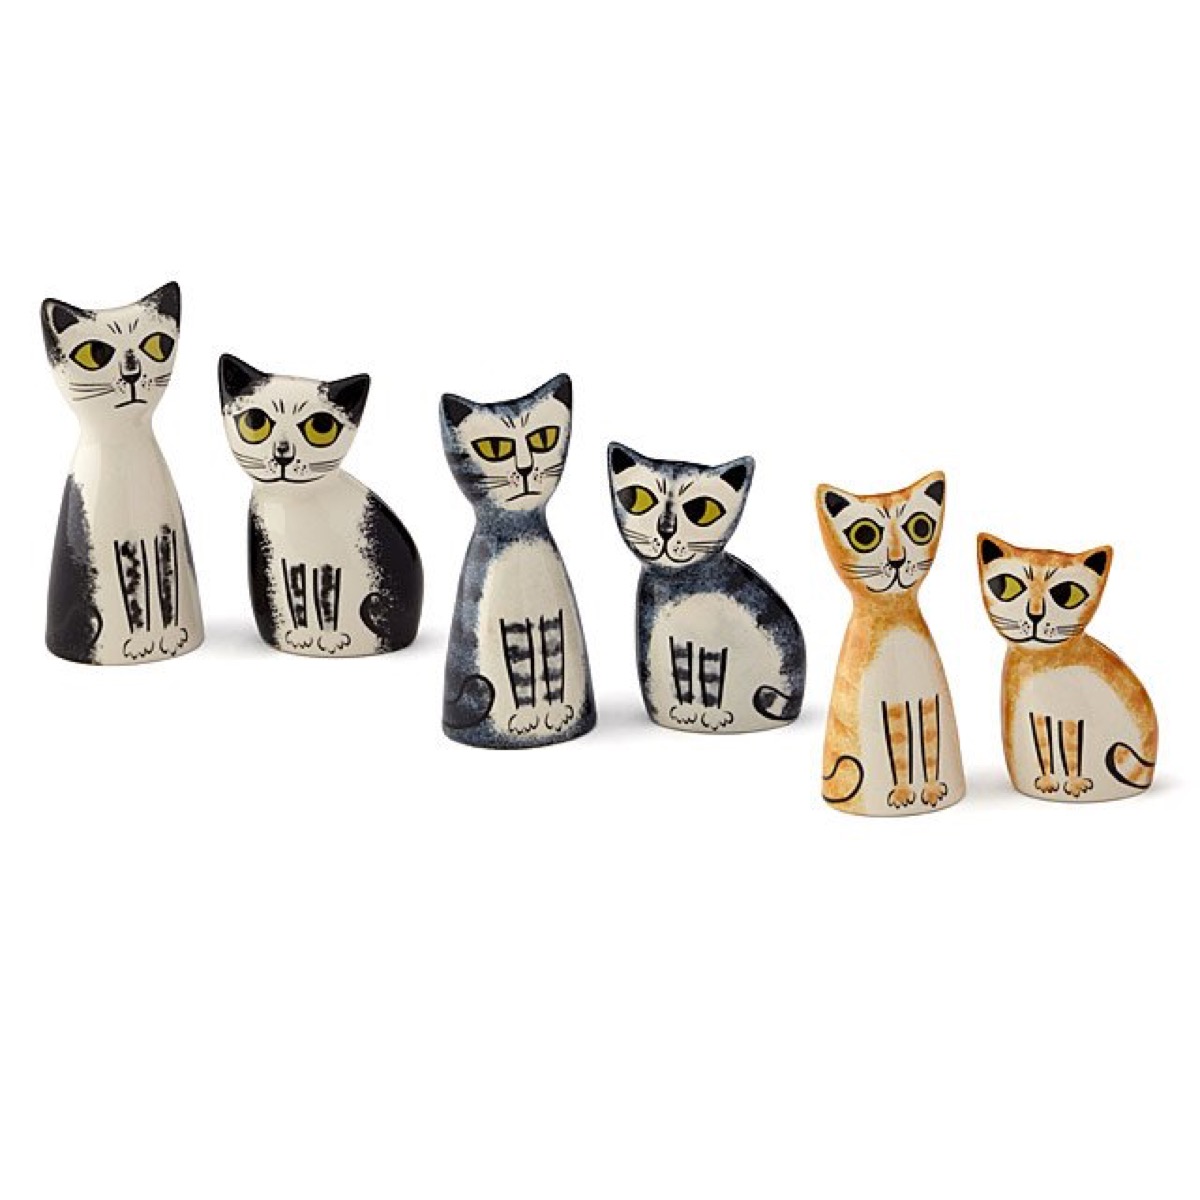 cat salt and pepper shakers, father's day gifts, gifts for dad